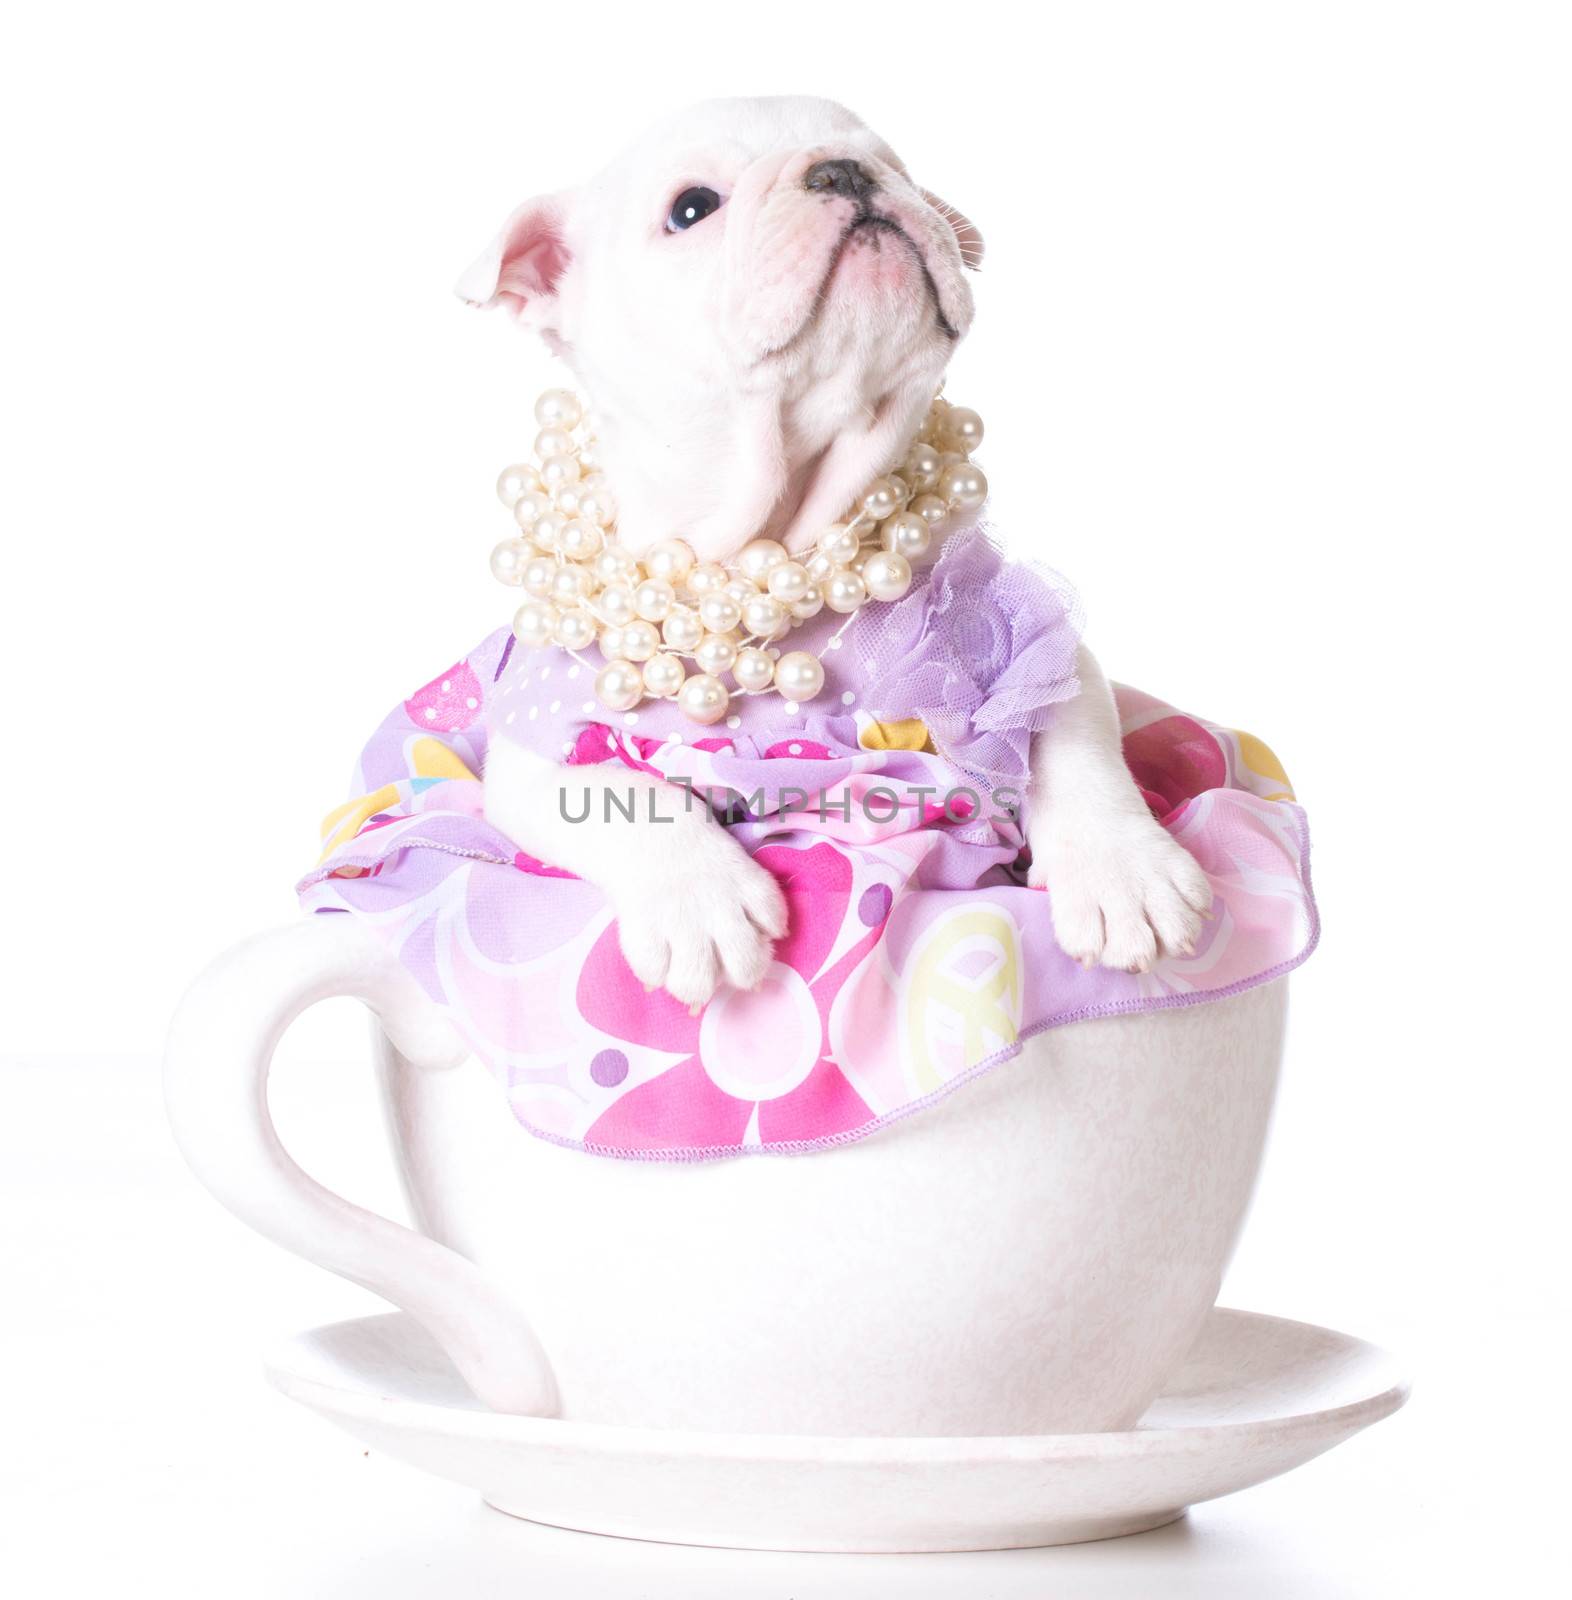 female puppy - bulldog sitting inside a teacup on white background - 7 weeks old